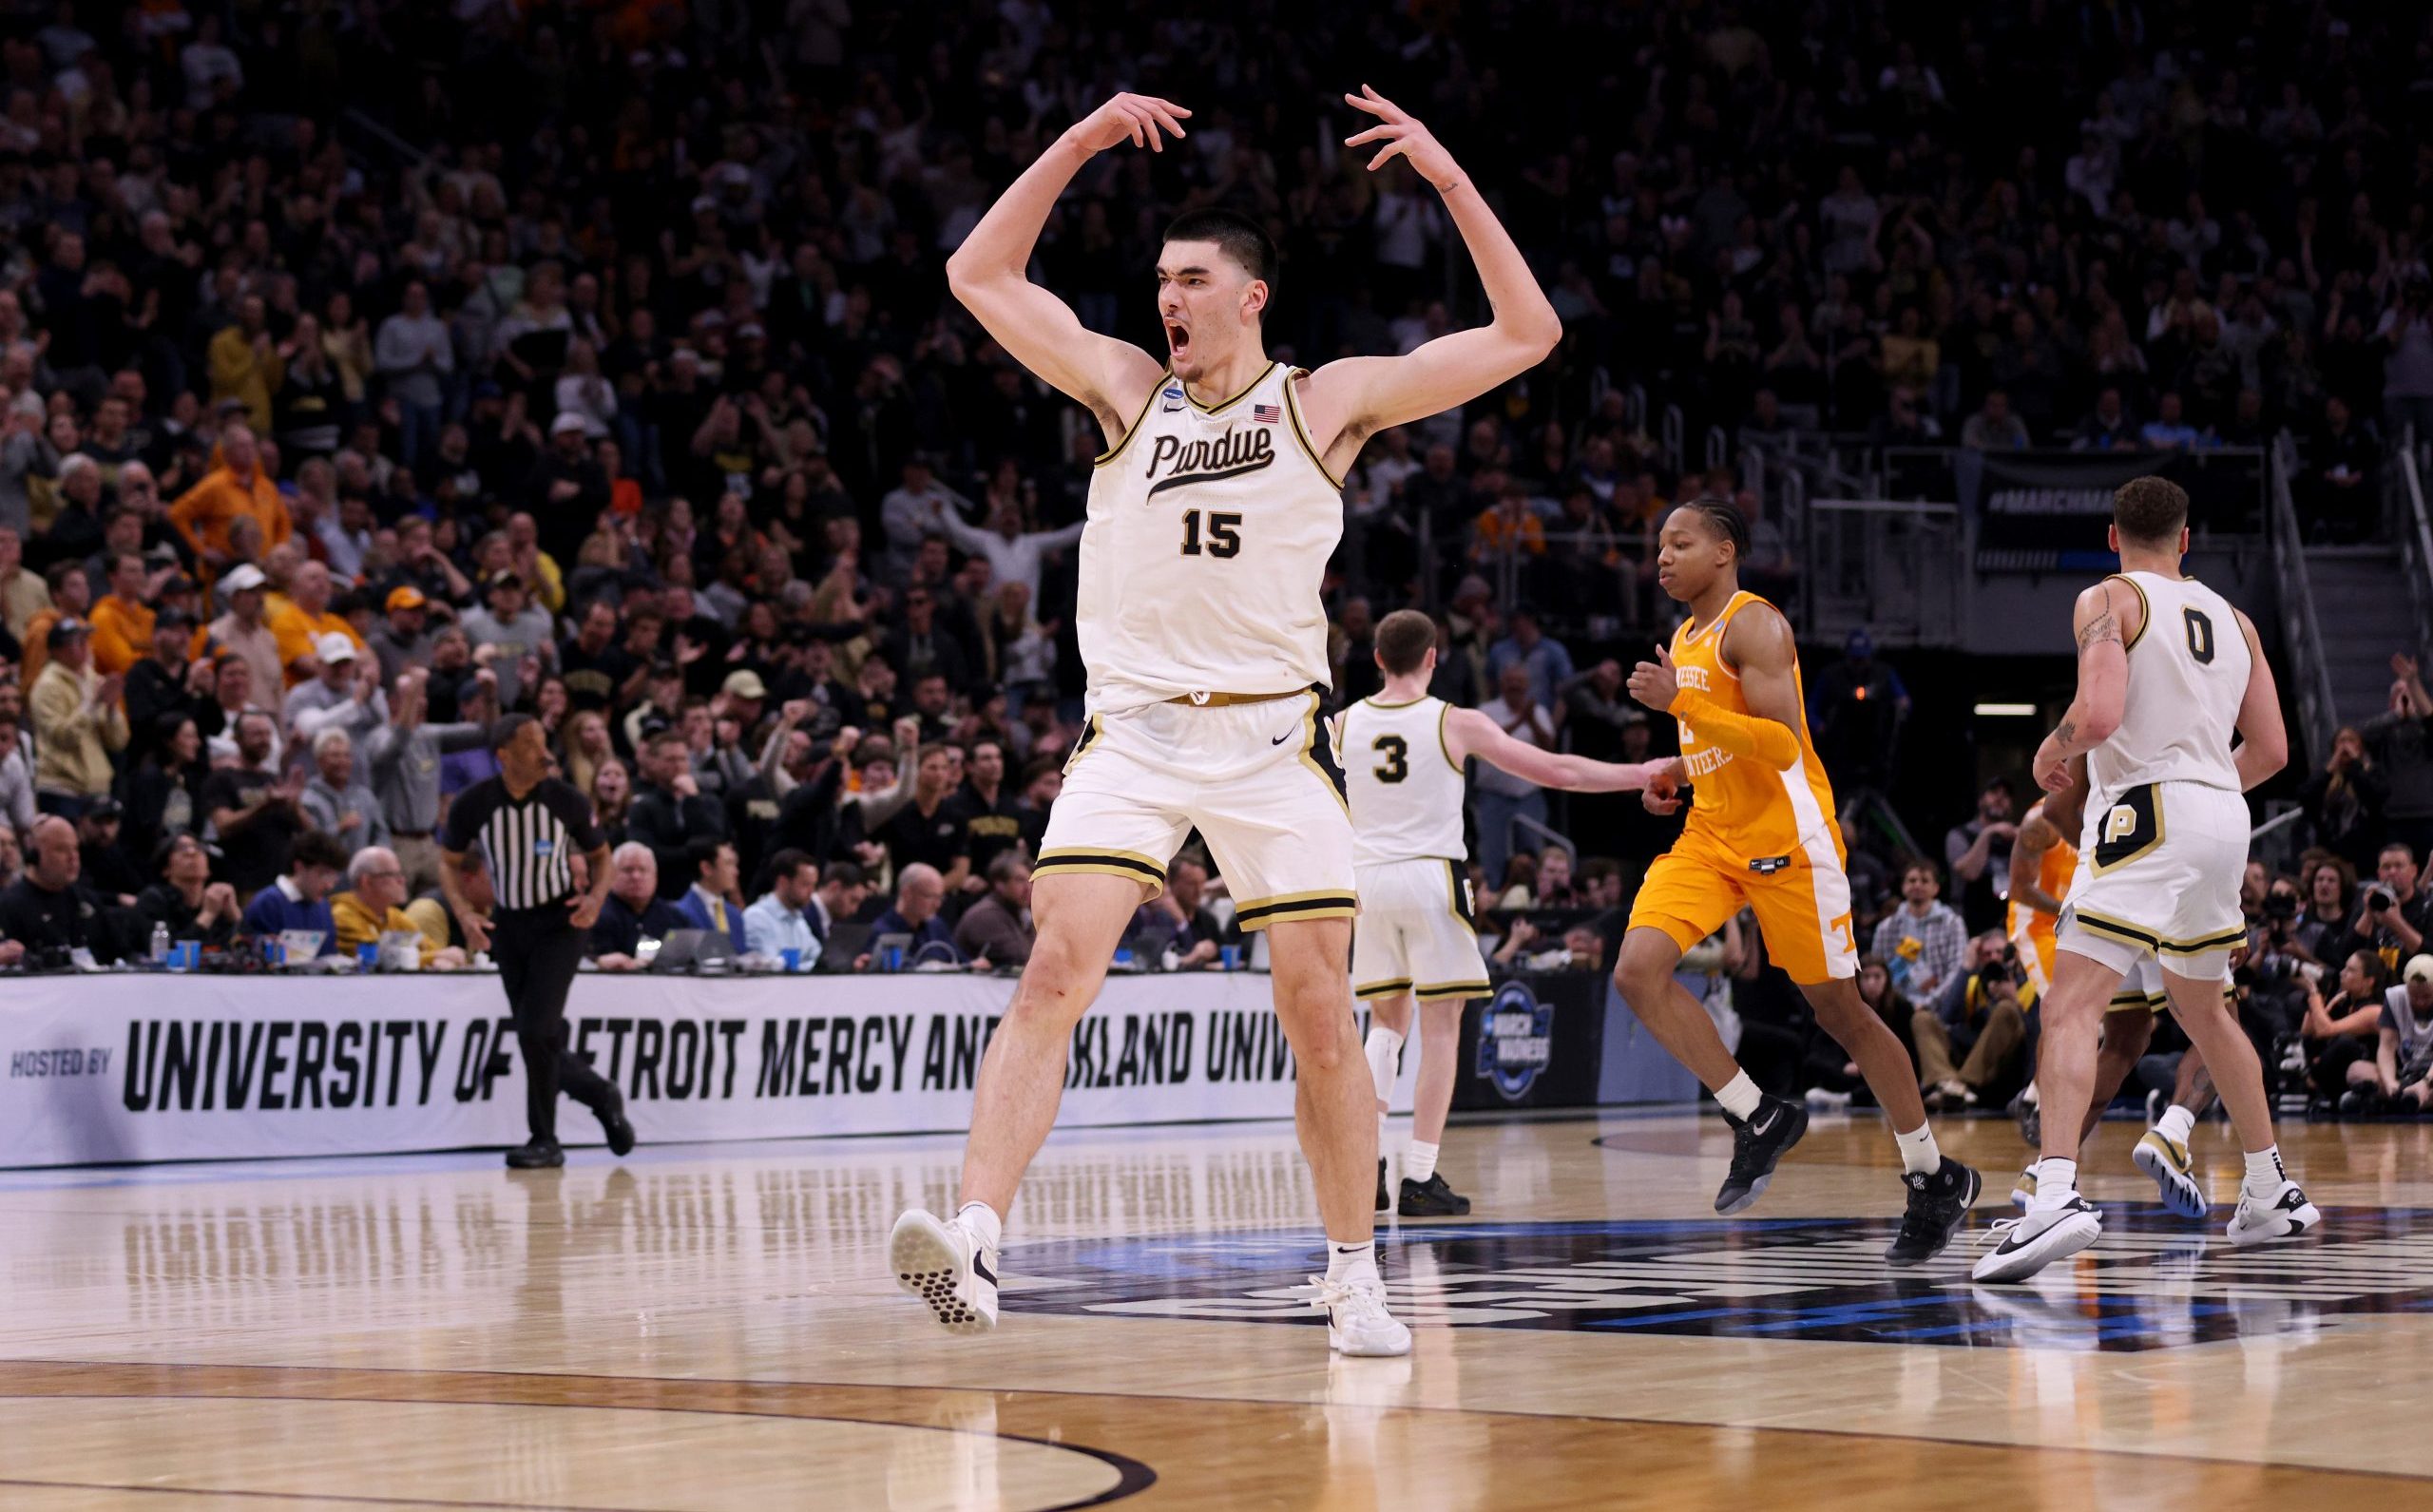 DETROIT, MICHIGAN - MARCH 31: Zach Edey #15 of the Purdue Boilermakers celebrates against the Tennessee Volunteers during the second half in the Elite 8 round of the NCAA Men's Basketball Tournament at Little Caesars Arena on March 31, 2024 in Detroit, Michigan. (Photo by Mike Mulholland/Getty Images)